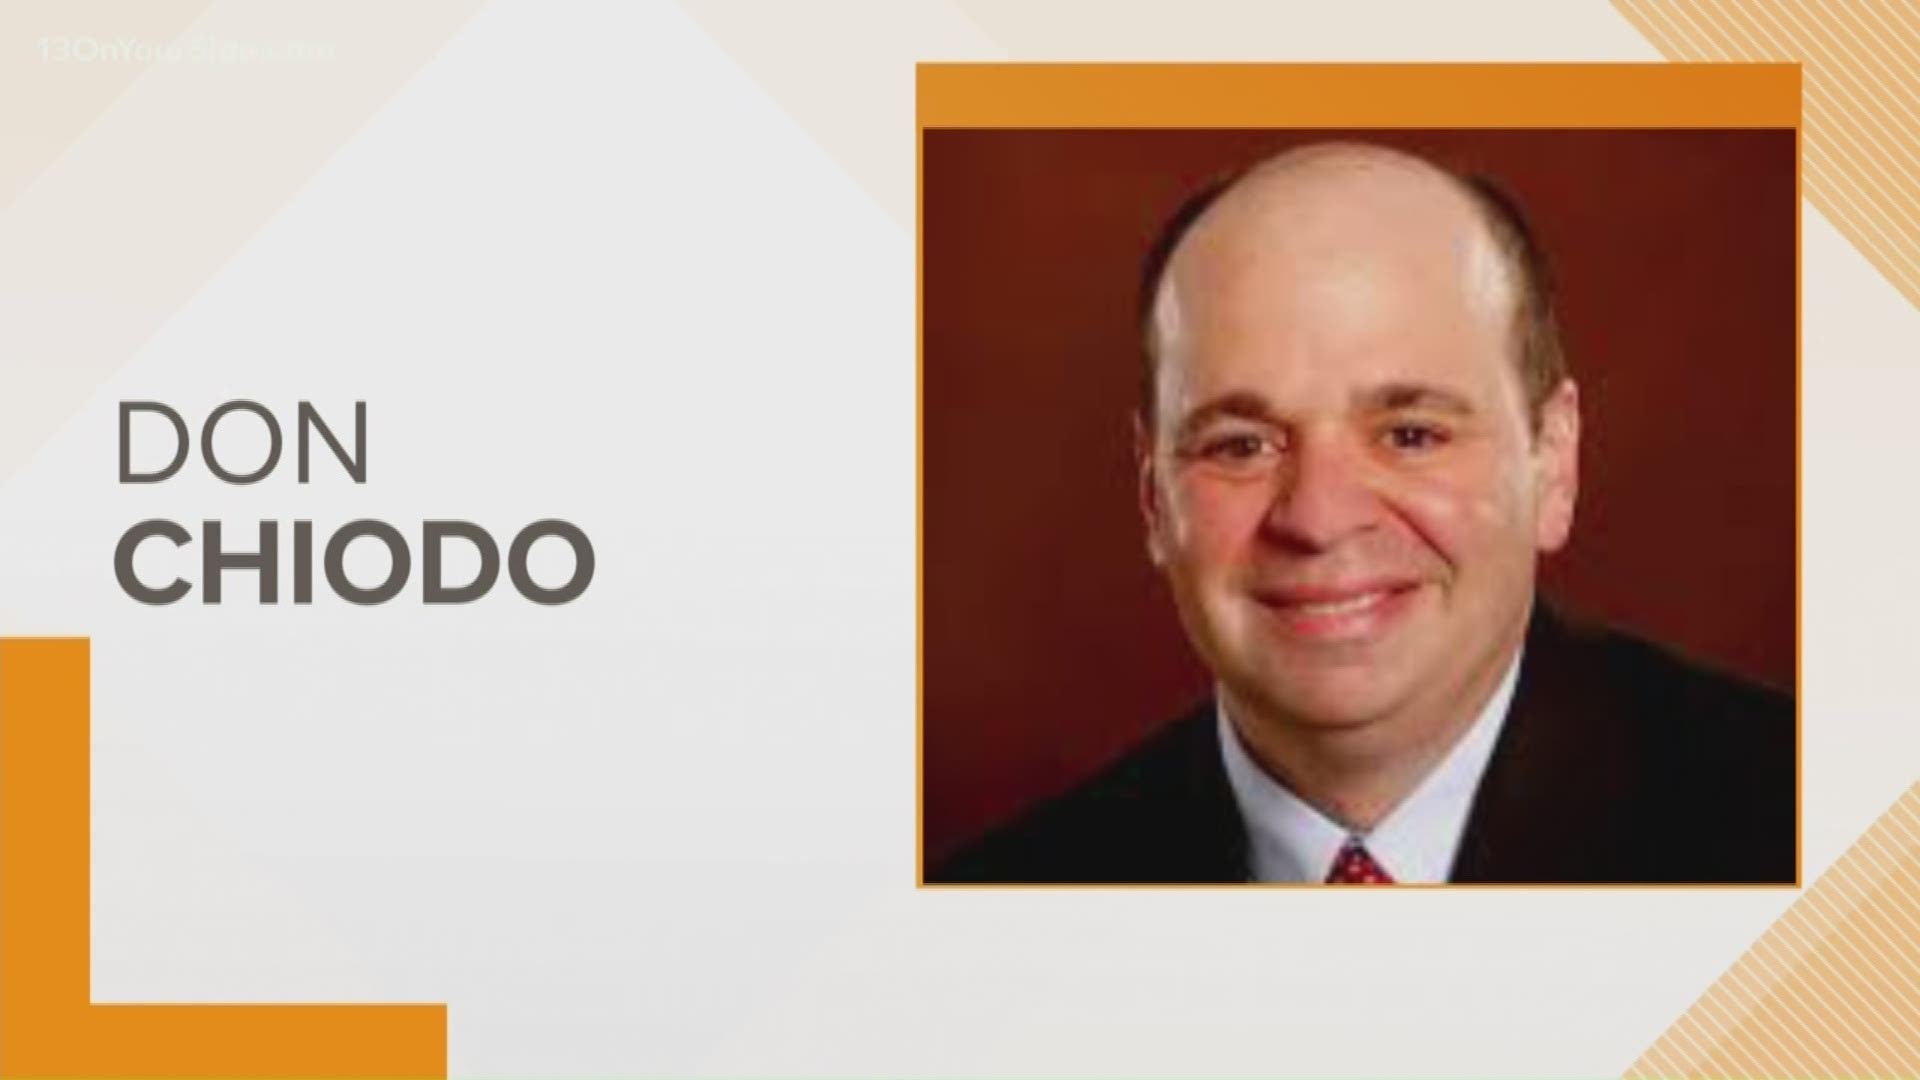 Don Chiodo, a radio broadcaster for Central Michigan football and basketball, has died in a car crash. He was 54.